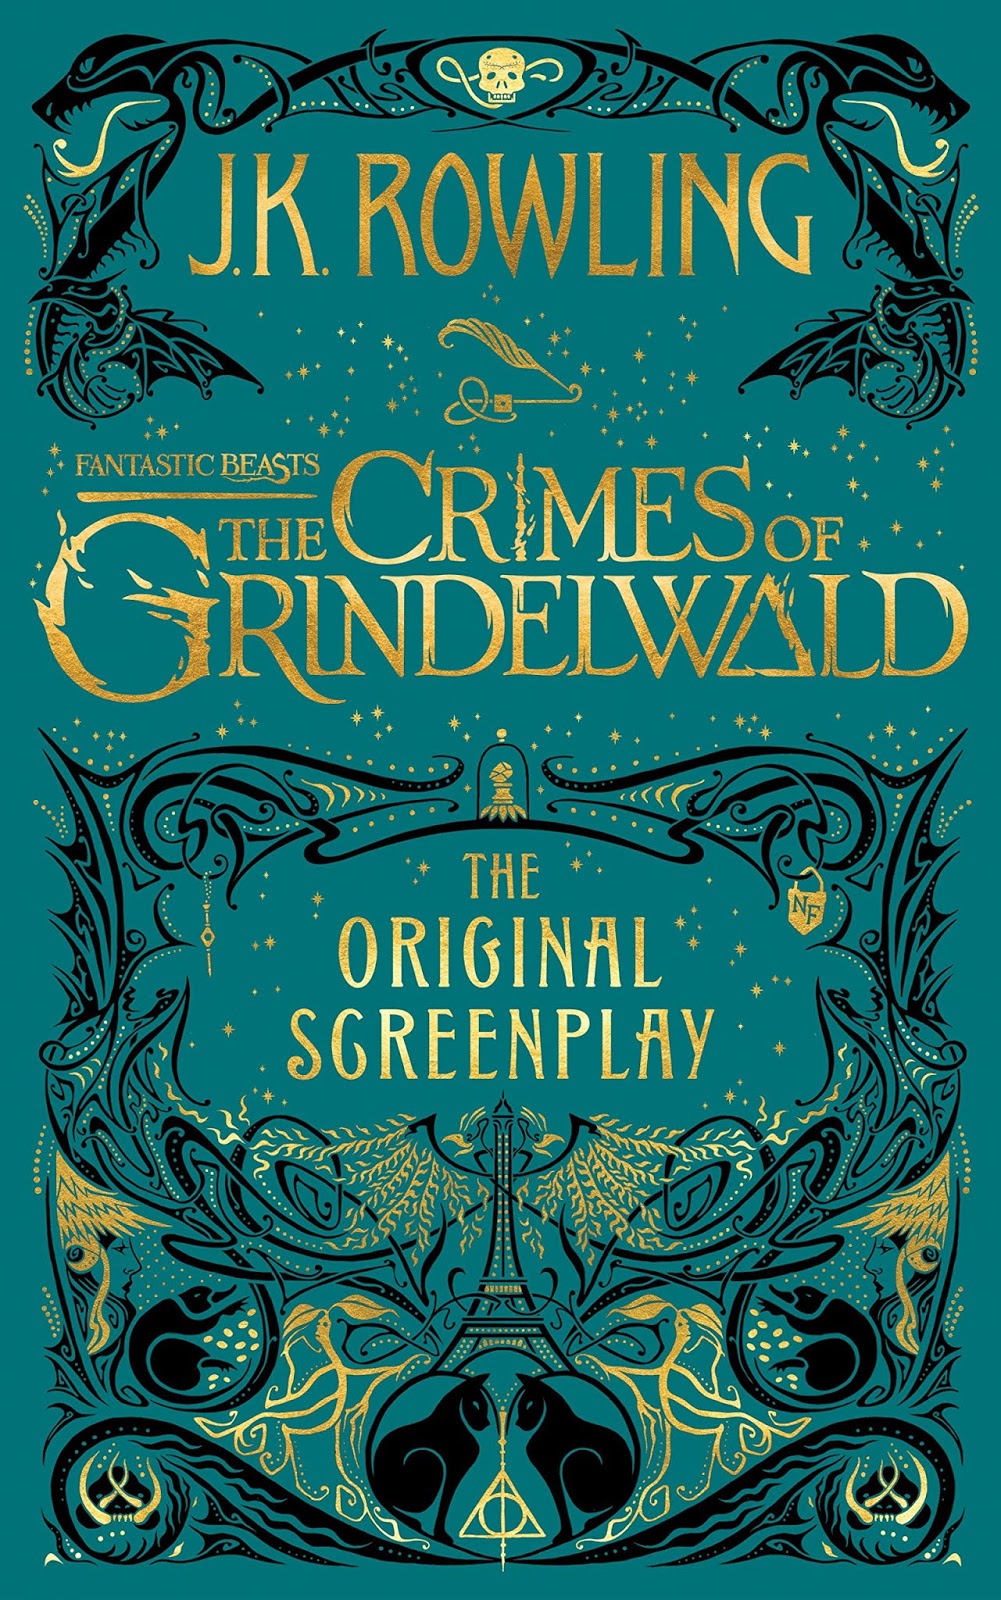 Fantastic Beasts: The Crimes of Grindelwald - The Original Screenplay by J. K. Rowling